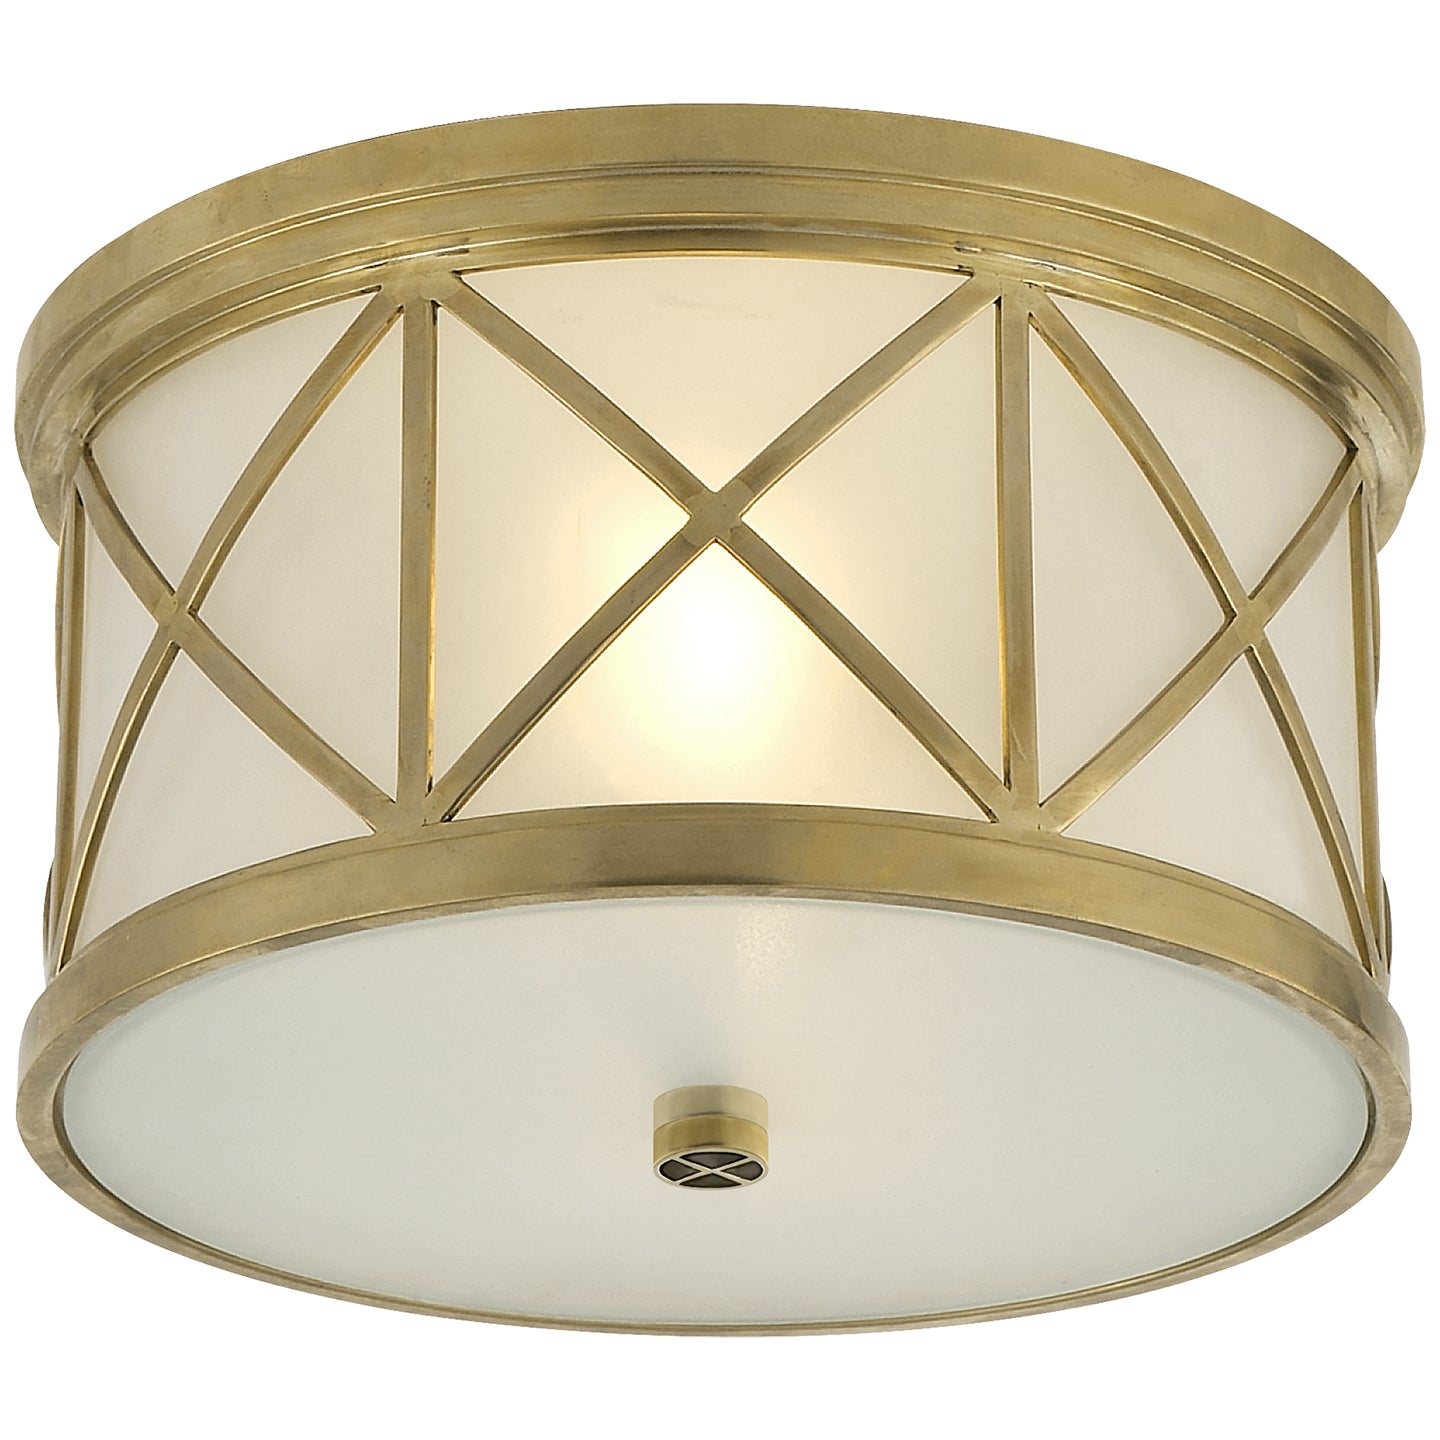 Load image into Gallery viewer, Visual Comfort Signature - SK 4010HAB-FG - Two Light Flush Mount - Montpelier - Hand-Rubbed Antique Brass
